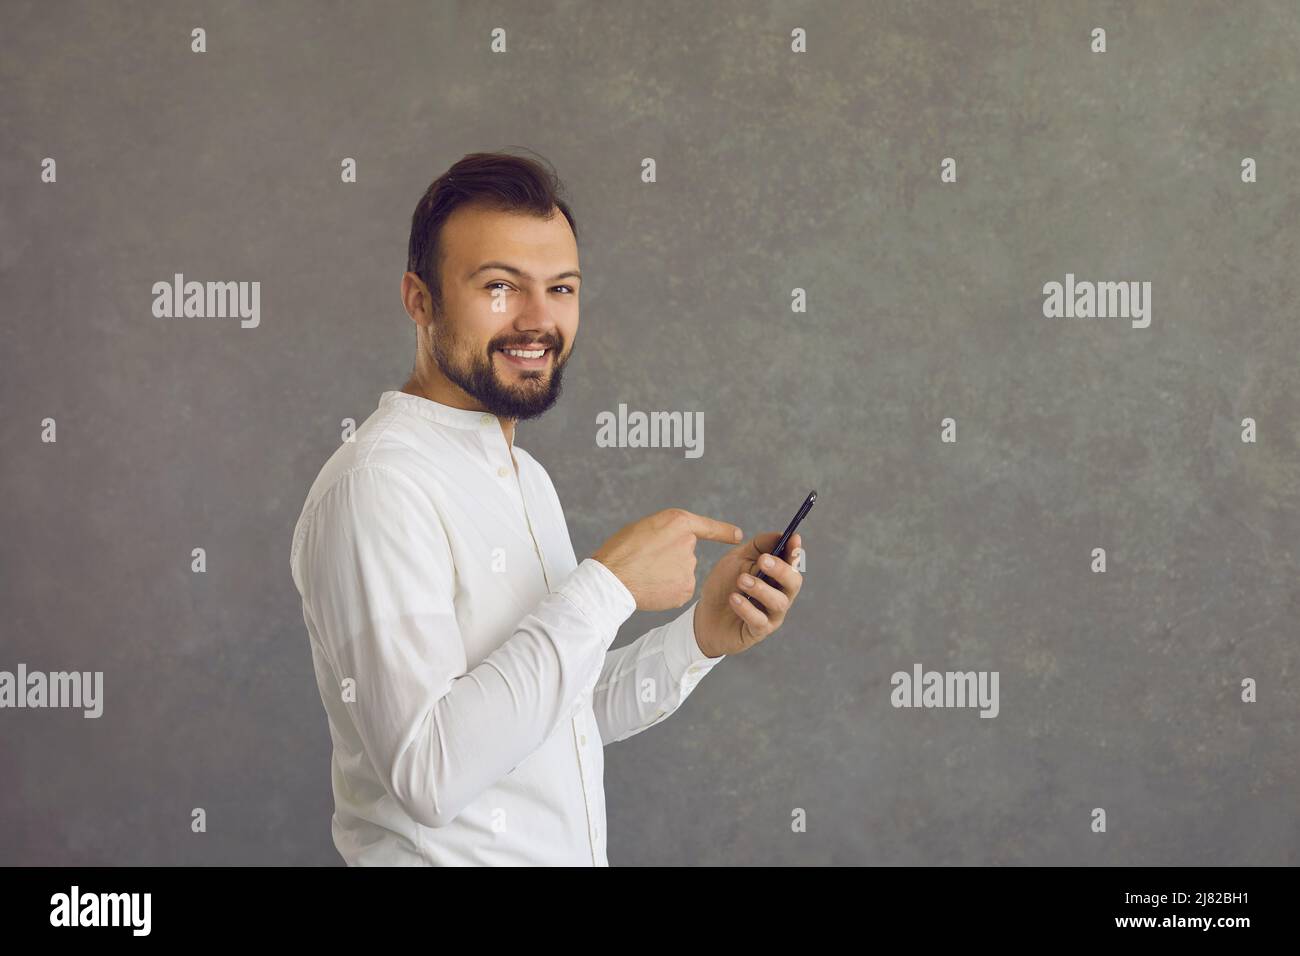 Happy young man using mobile phone standing isolated on grey copy space background Stock Photo